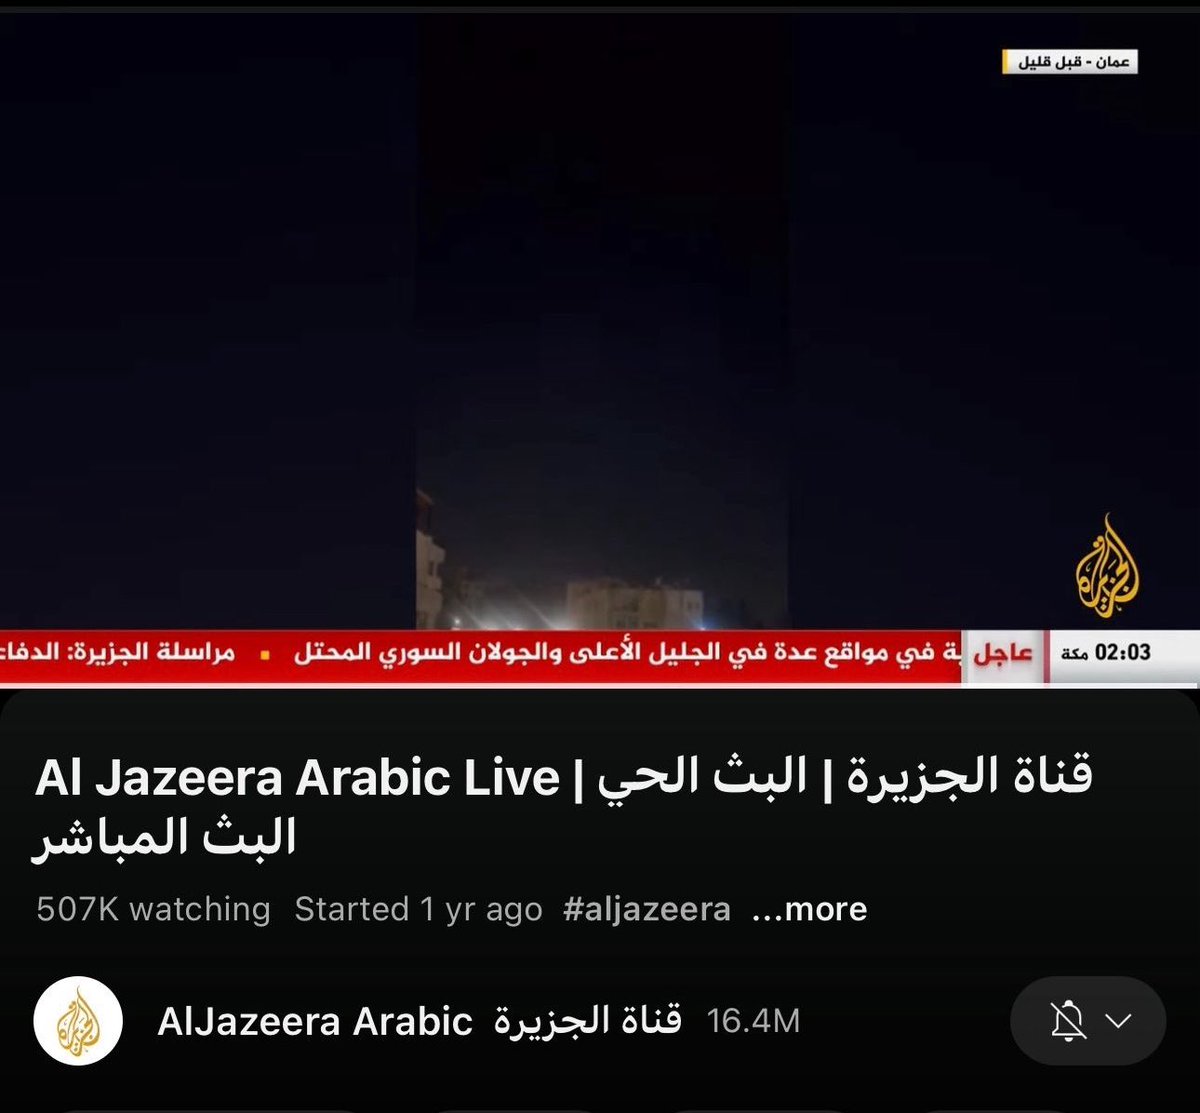 Absolutely remarkable! Our dedicated teams at Al Jazeera, both on the ground and in our newsroom, continue to deliver unparalleled coverage of the region. With over 507,000 simultaneous views on YouTube alone, the world trusts us to bring them the latest developments. Unwavering…